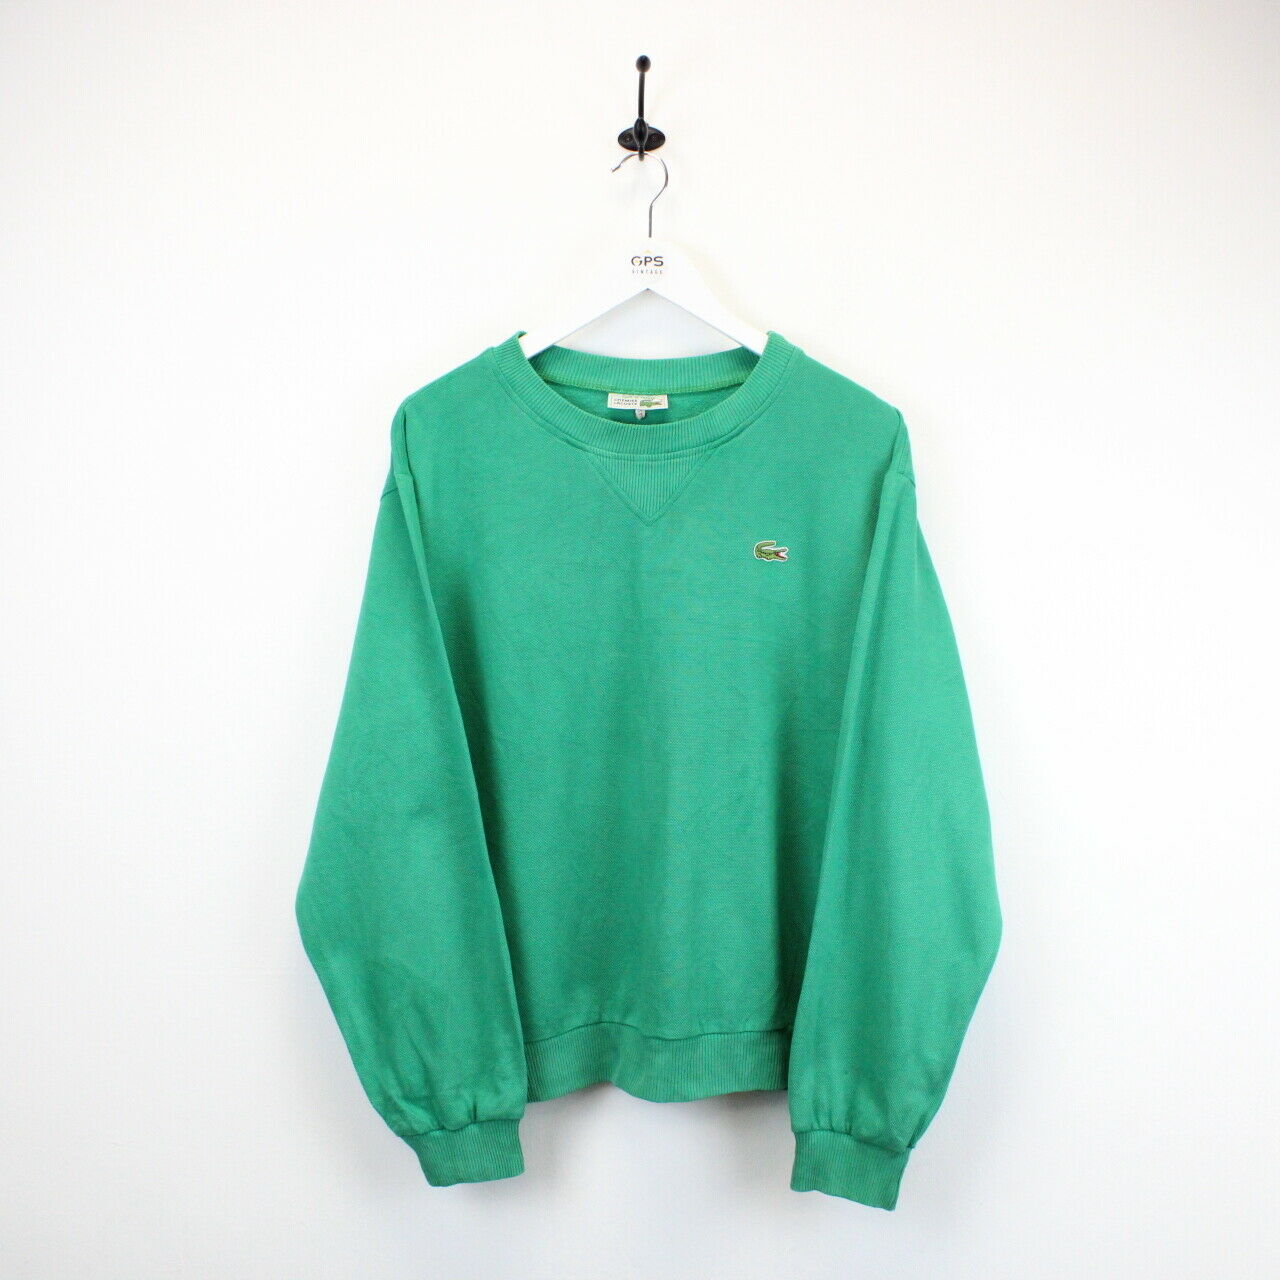 CHEMISE LACOSTE 90s Knit Sweatshirt Green | Small